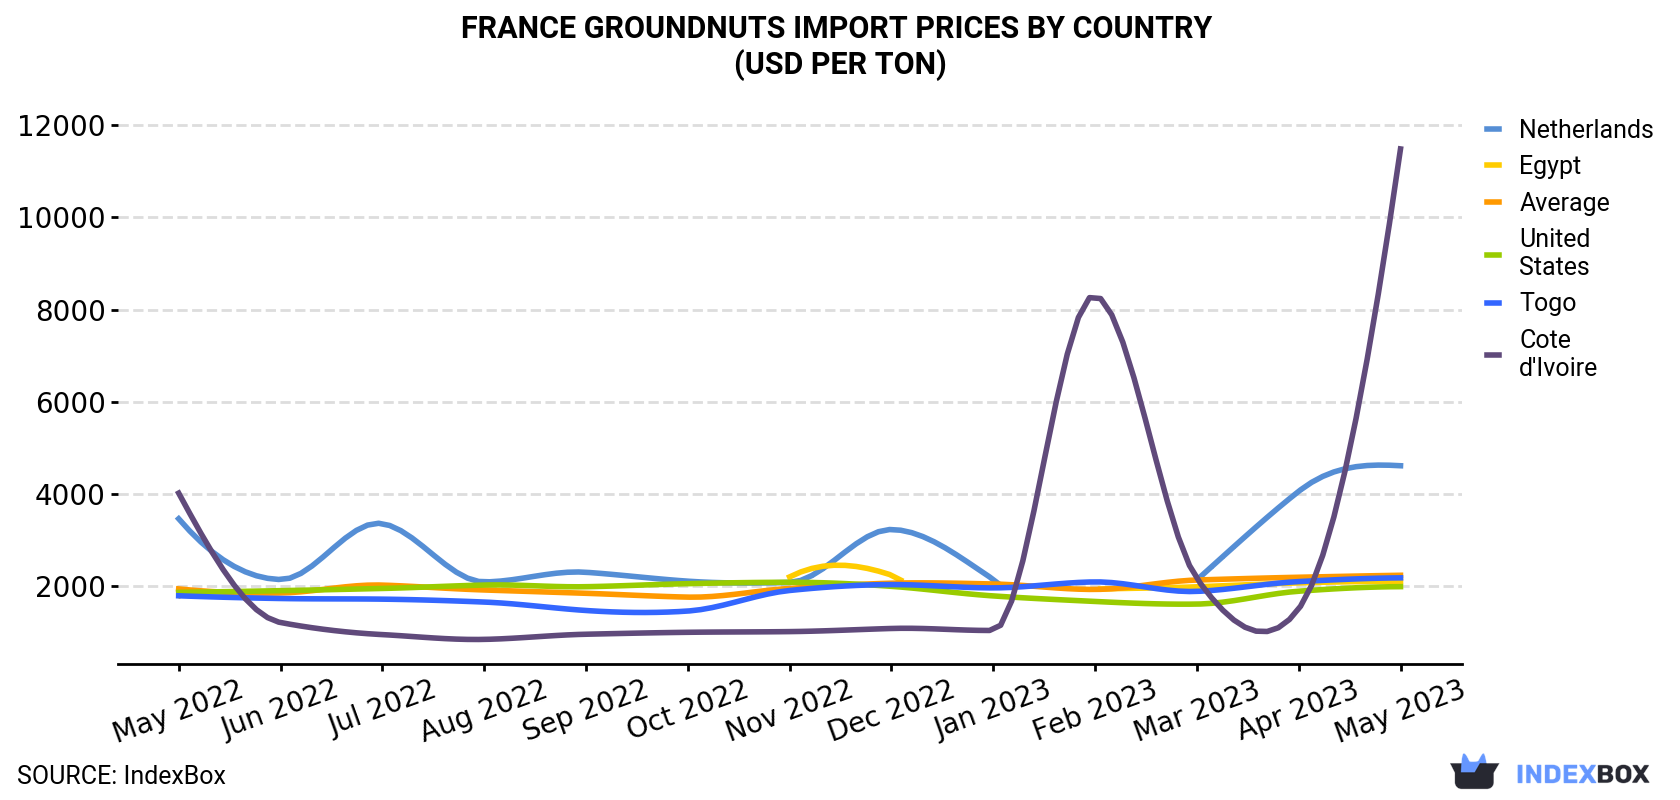 France Groundnuts Import Prices By Country (USD Per Ton)